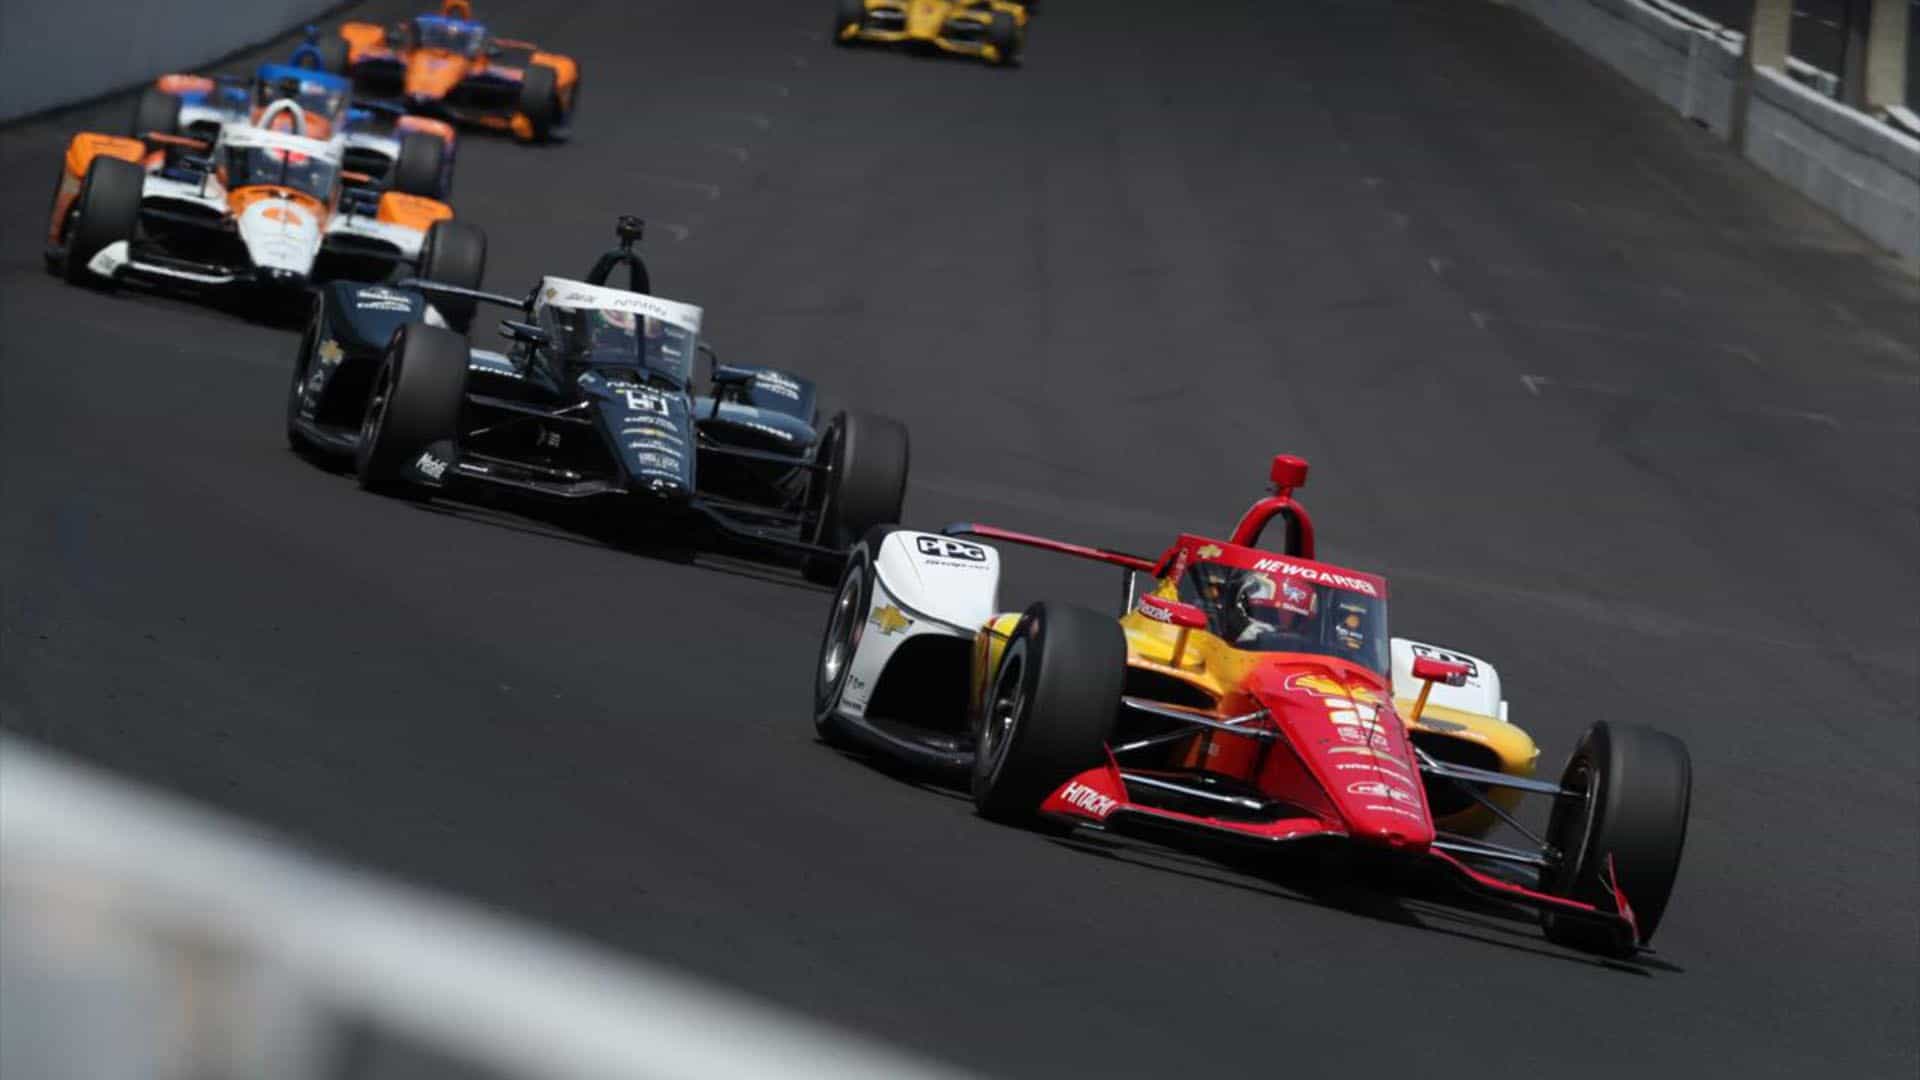 NTT IndyCar Series drivers expect patience and opportunism to rule the day in the 2023 running of the Indianapolis 500.